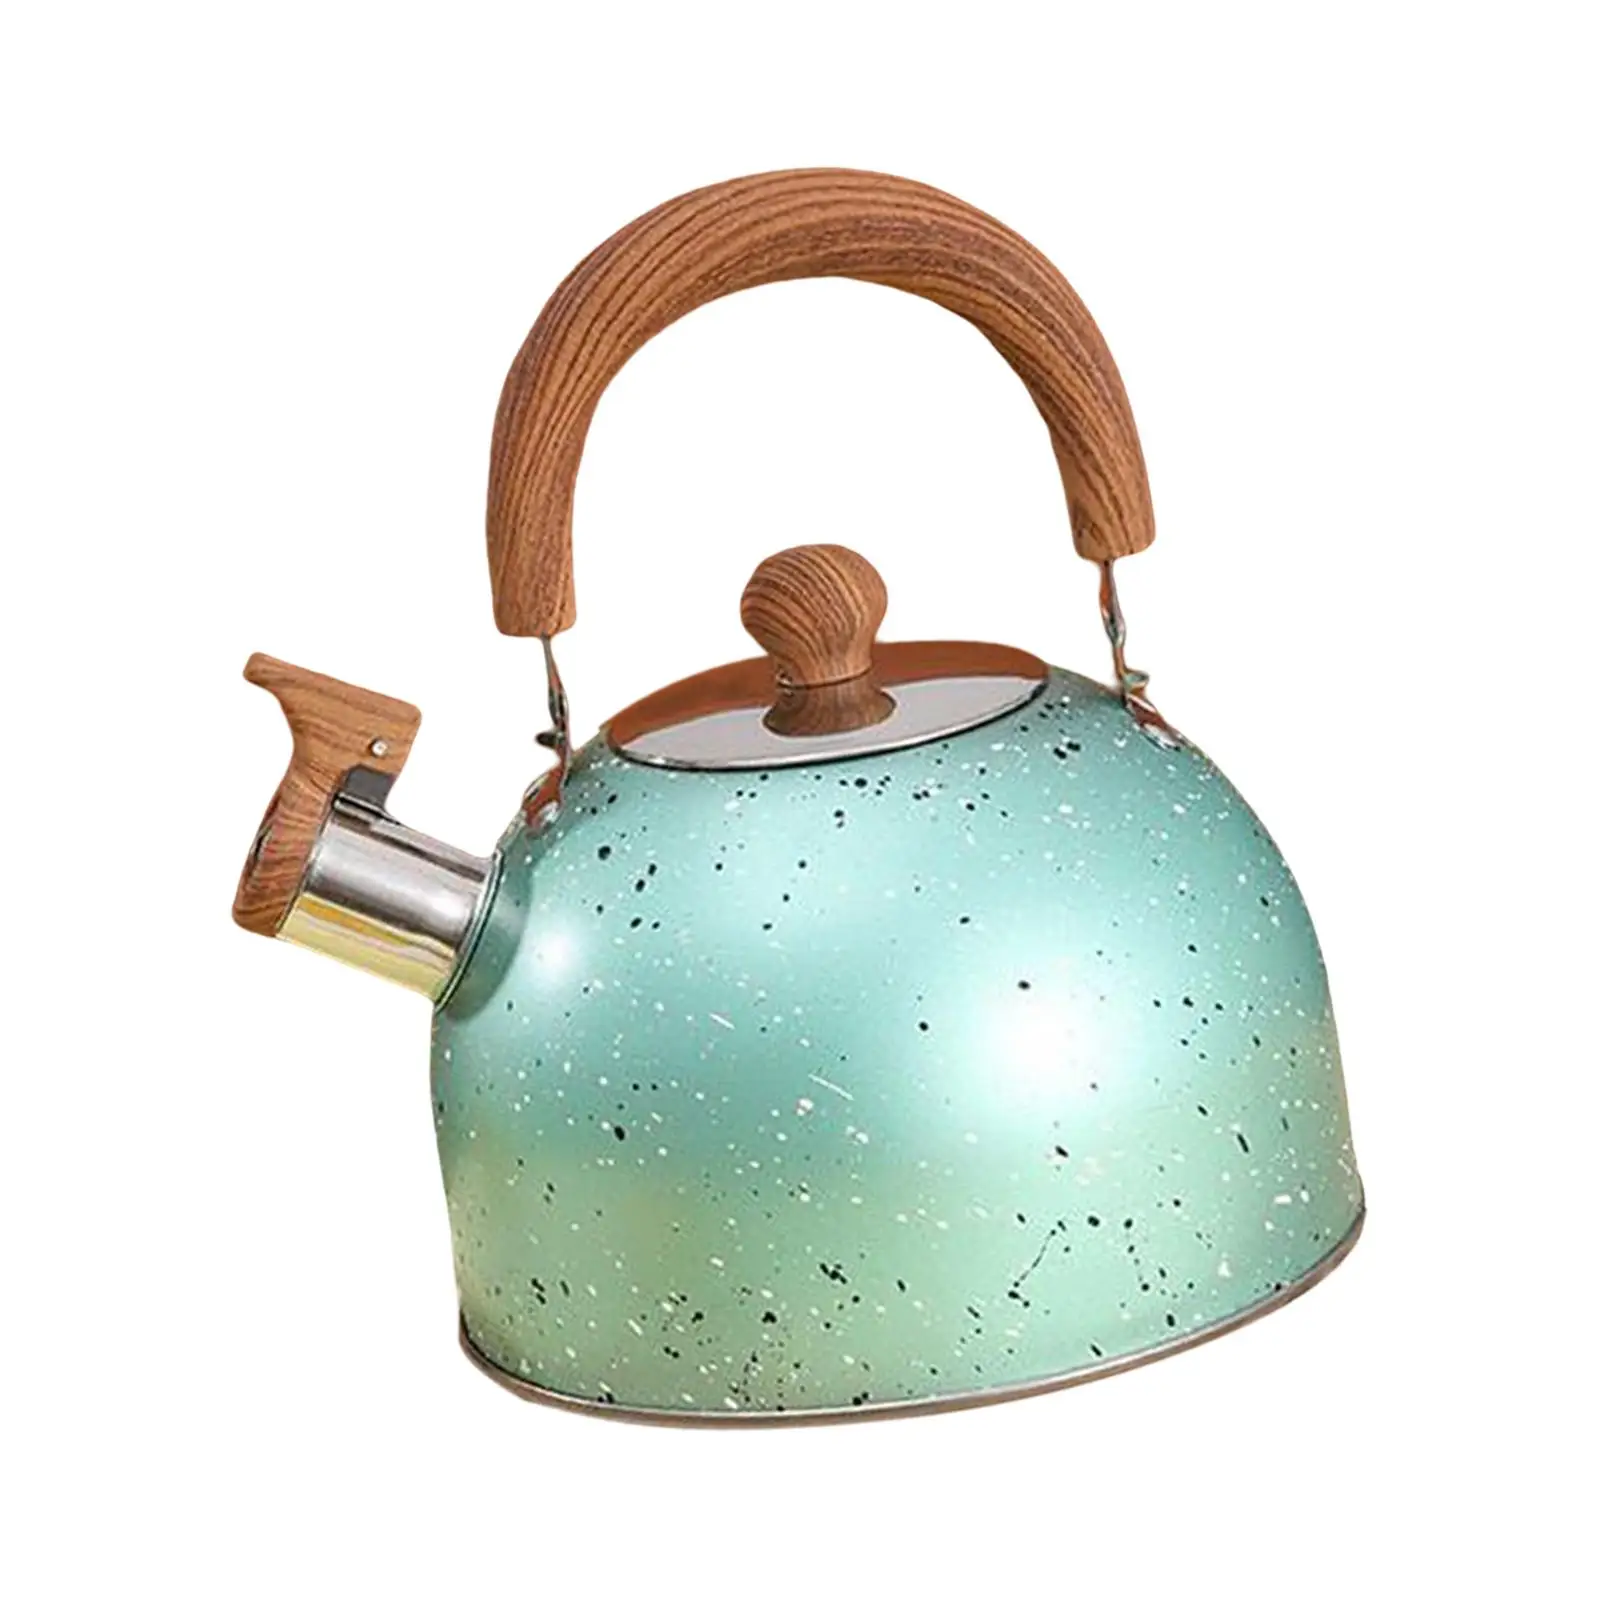 Whistle tea Kettle for Stove Top with Wood Handle Tea Pots for Boiling water Source